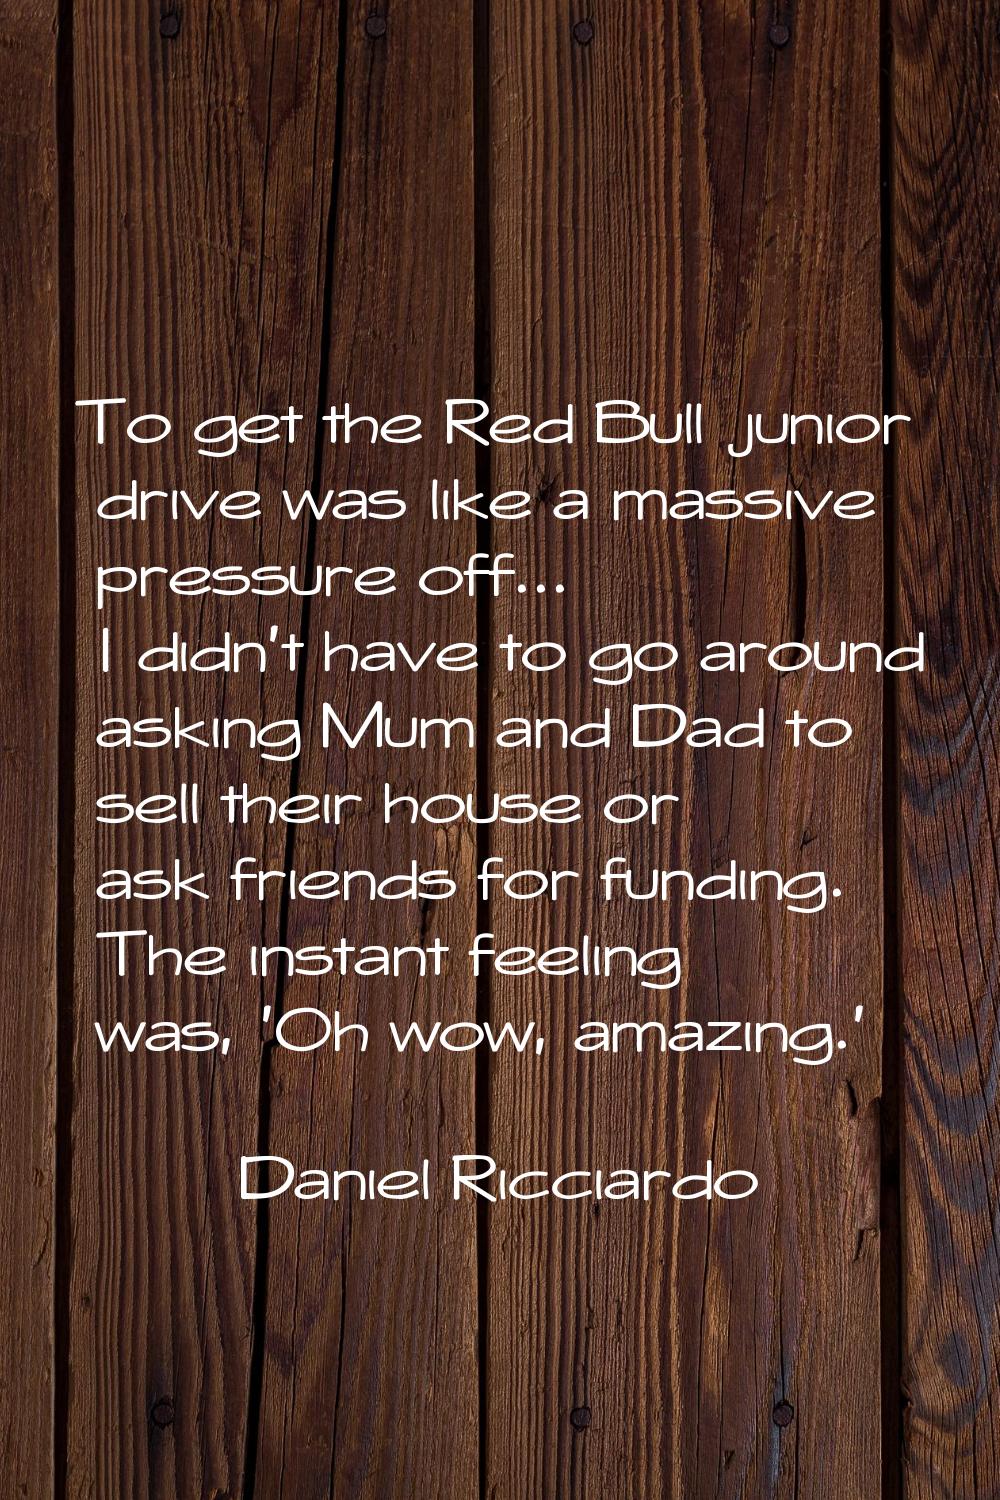 To get the Red Bull junior drive was like a massive pressure off... I didn't have to go around aski